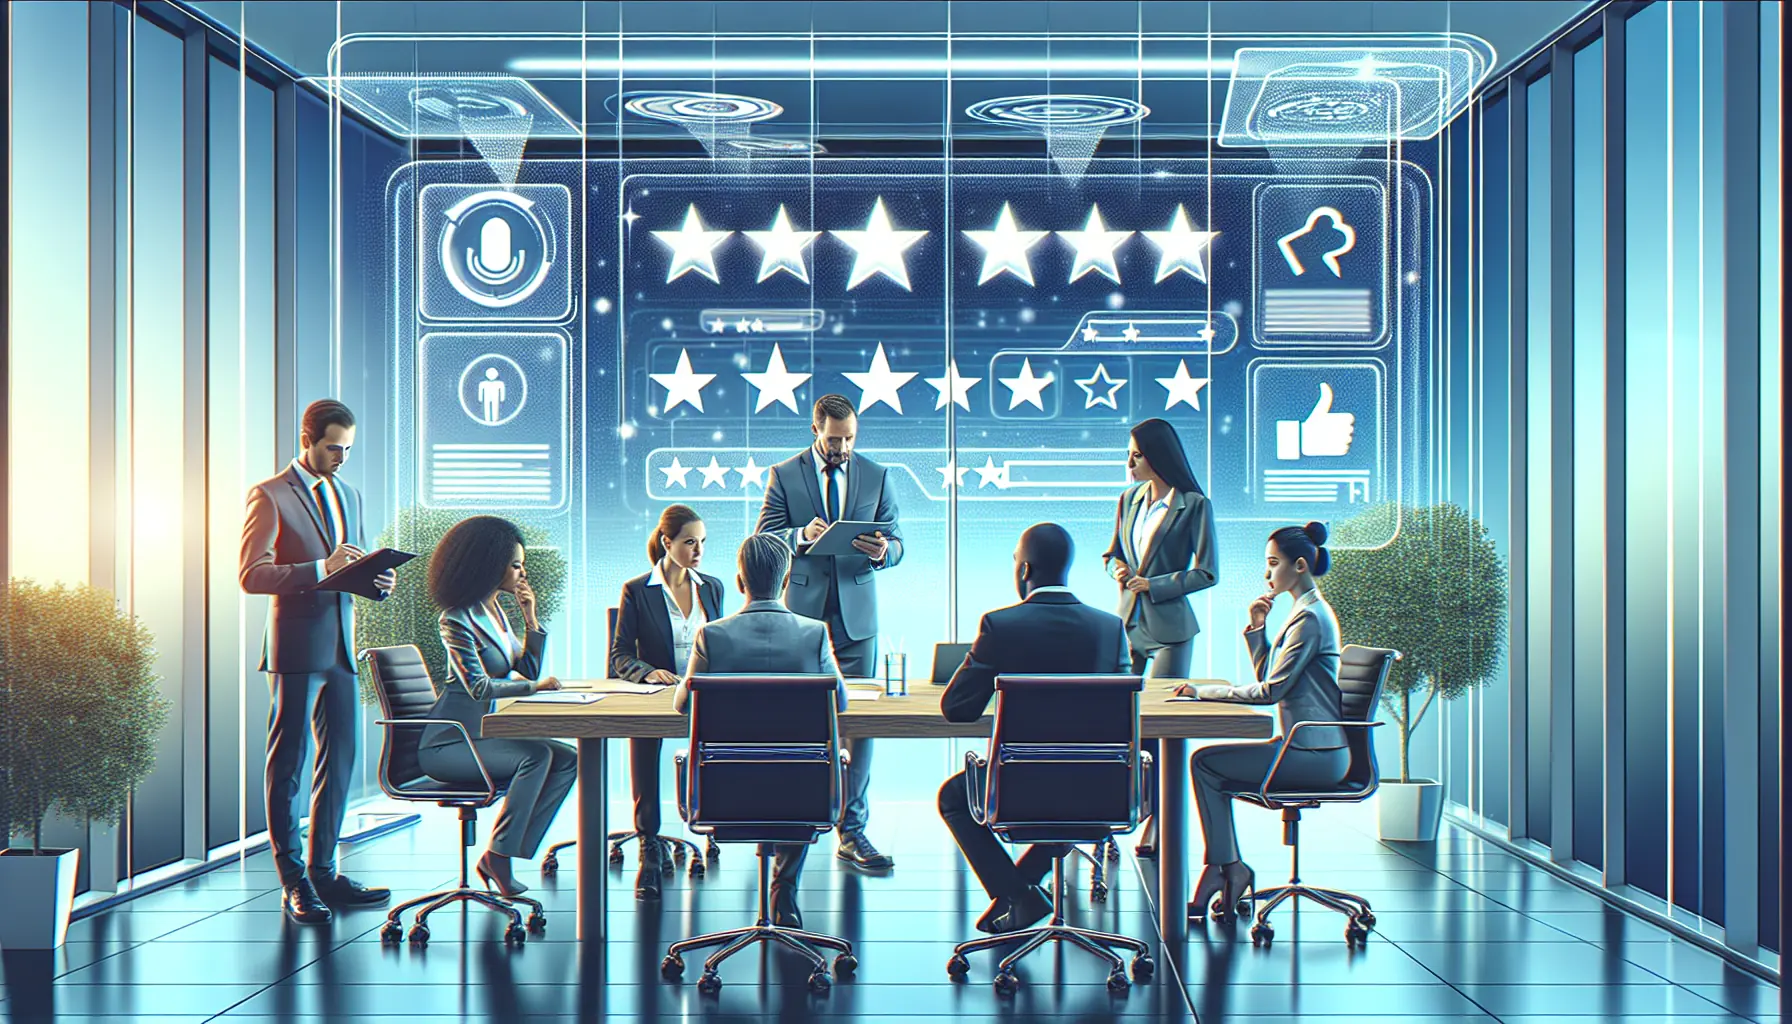 A digital painting of a modern office meeting room where a diverse group of business professionals is evaluating different digital screens displaying star ratings and customer reviews, with transparen